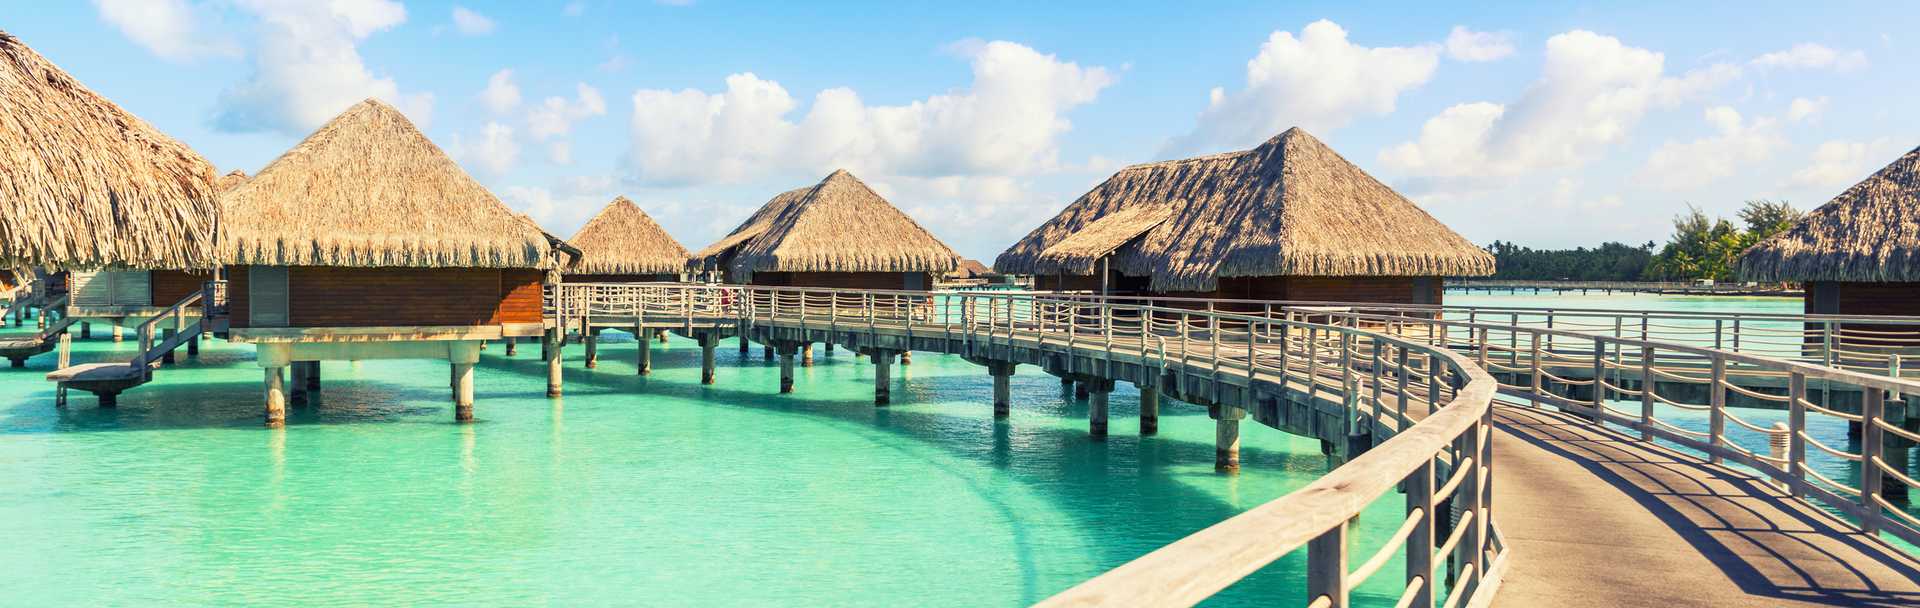 Overwater bungalows on a Tahiti vacation